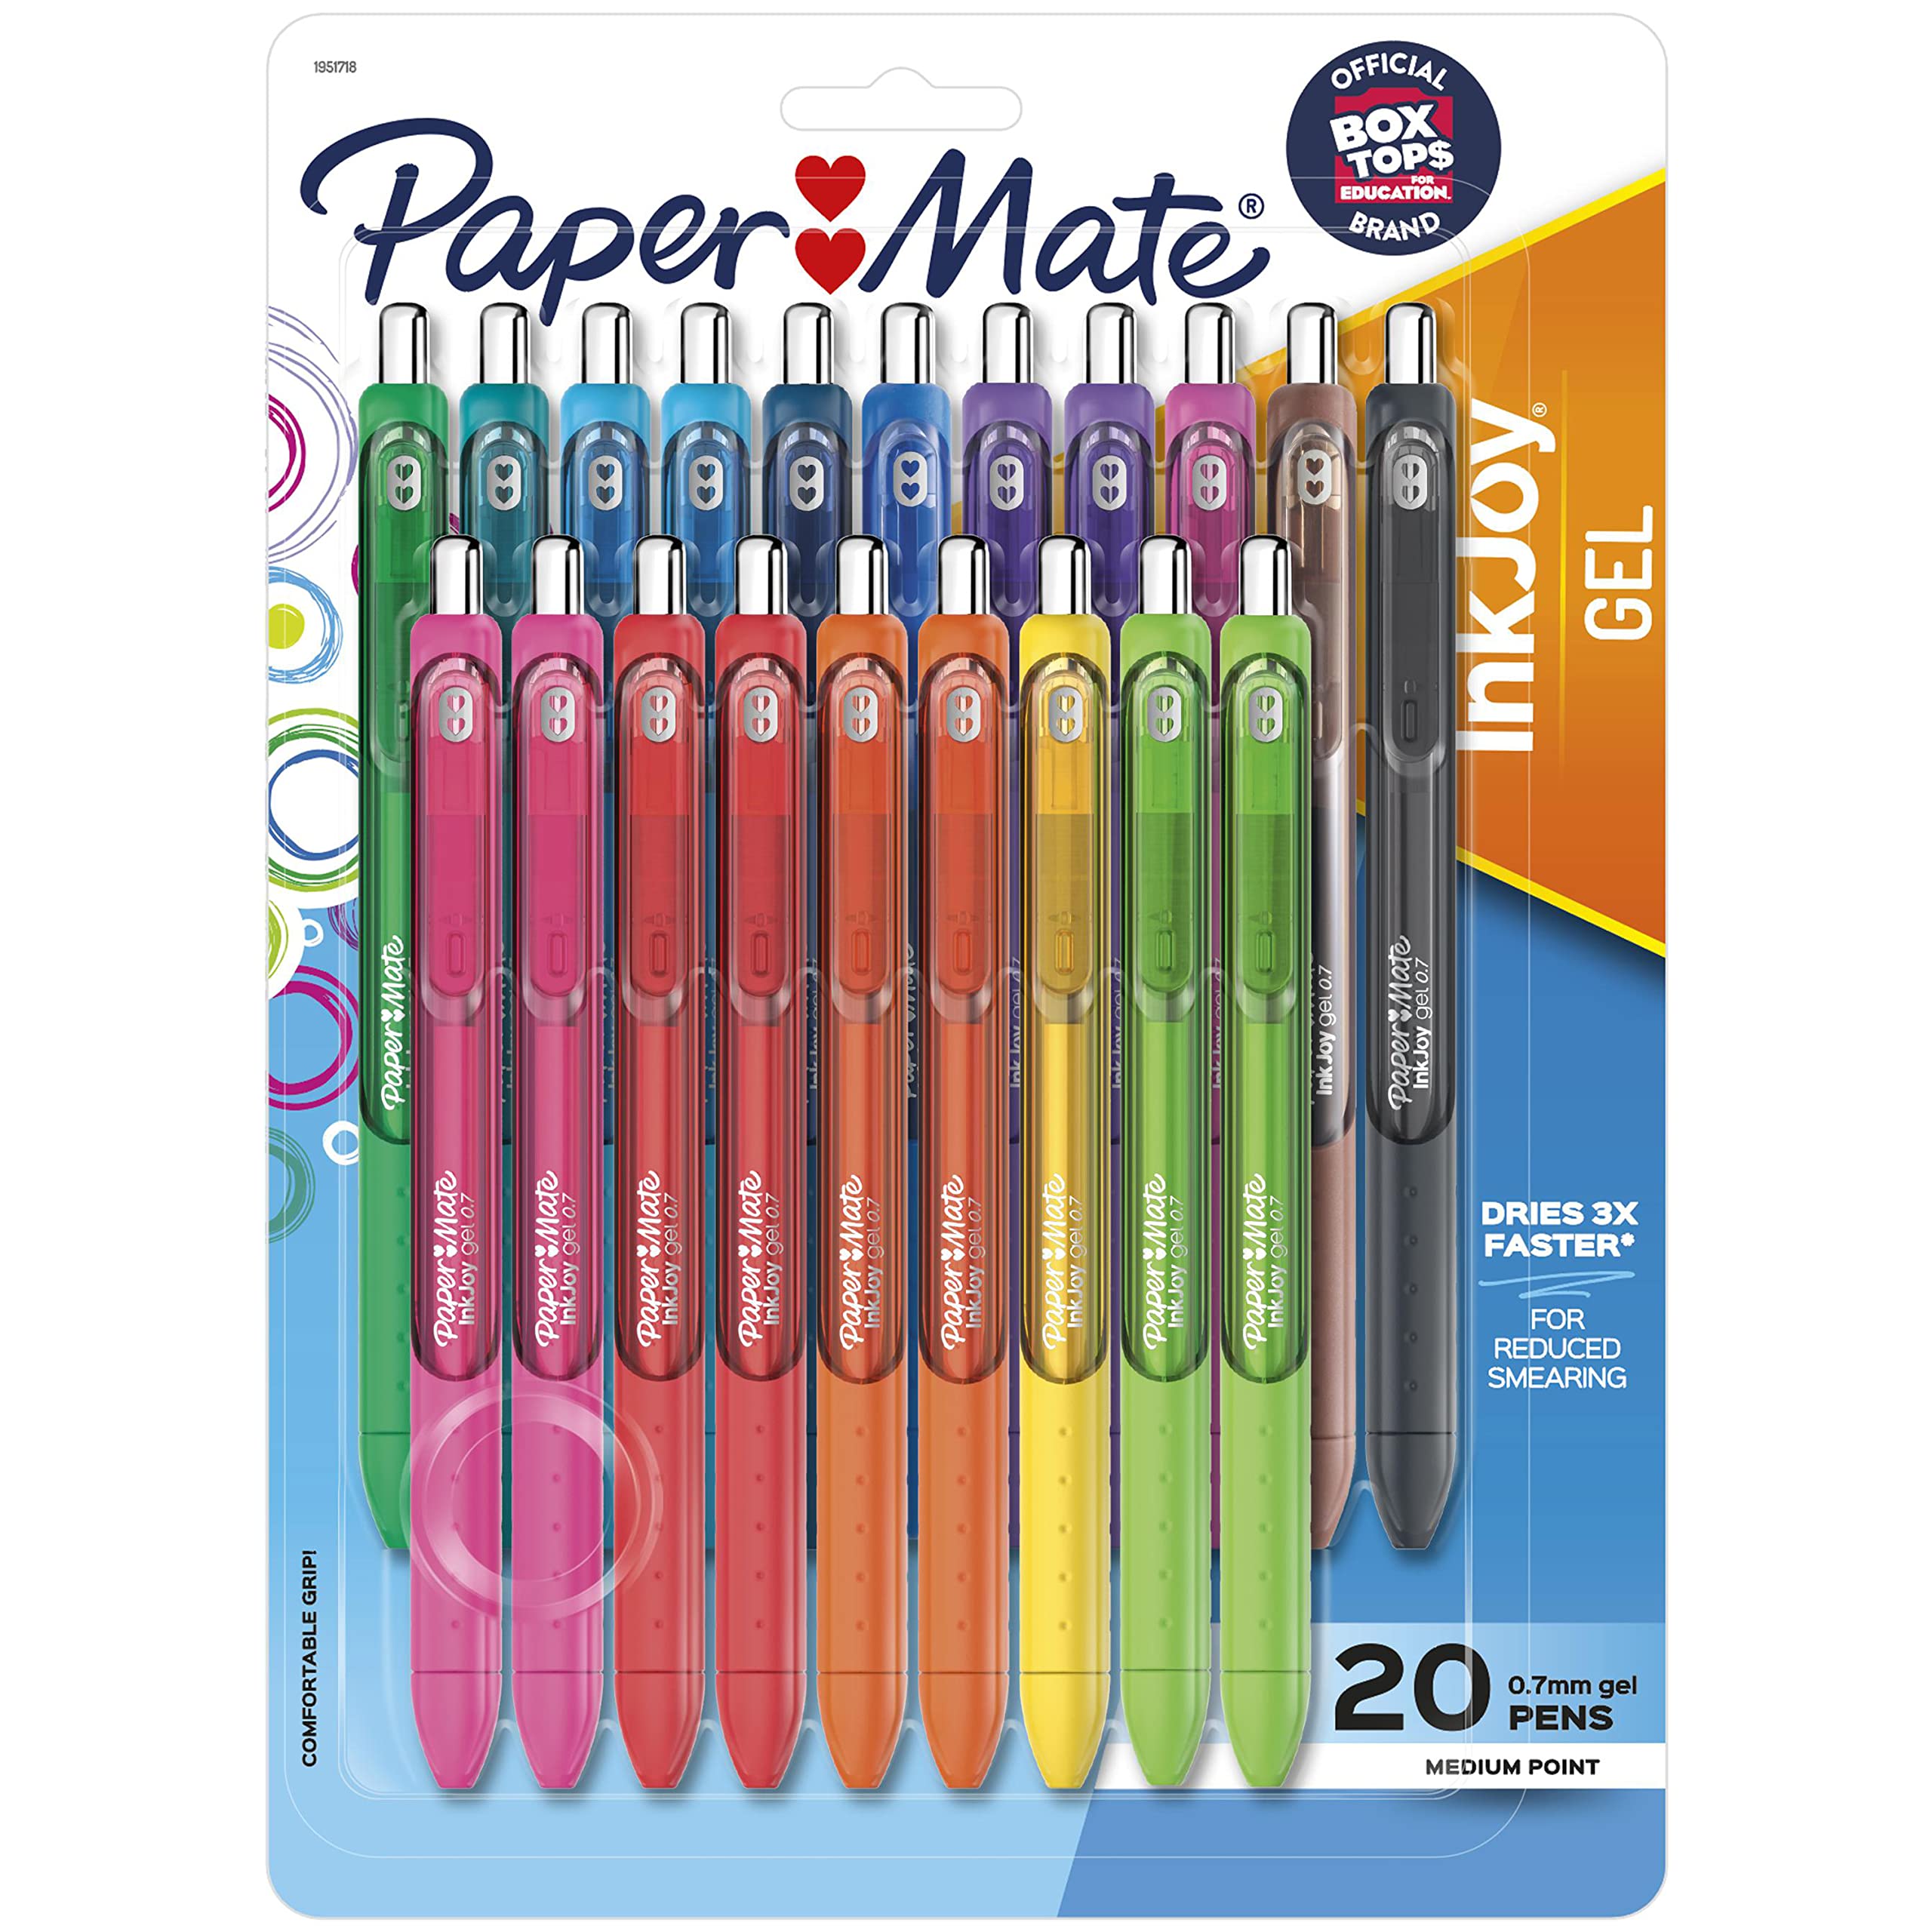 Paper Mate 1985481 Medium Point InkJoy Gel Pen - Assorted Colours (Pack of 14)